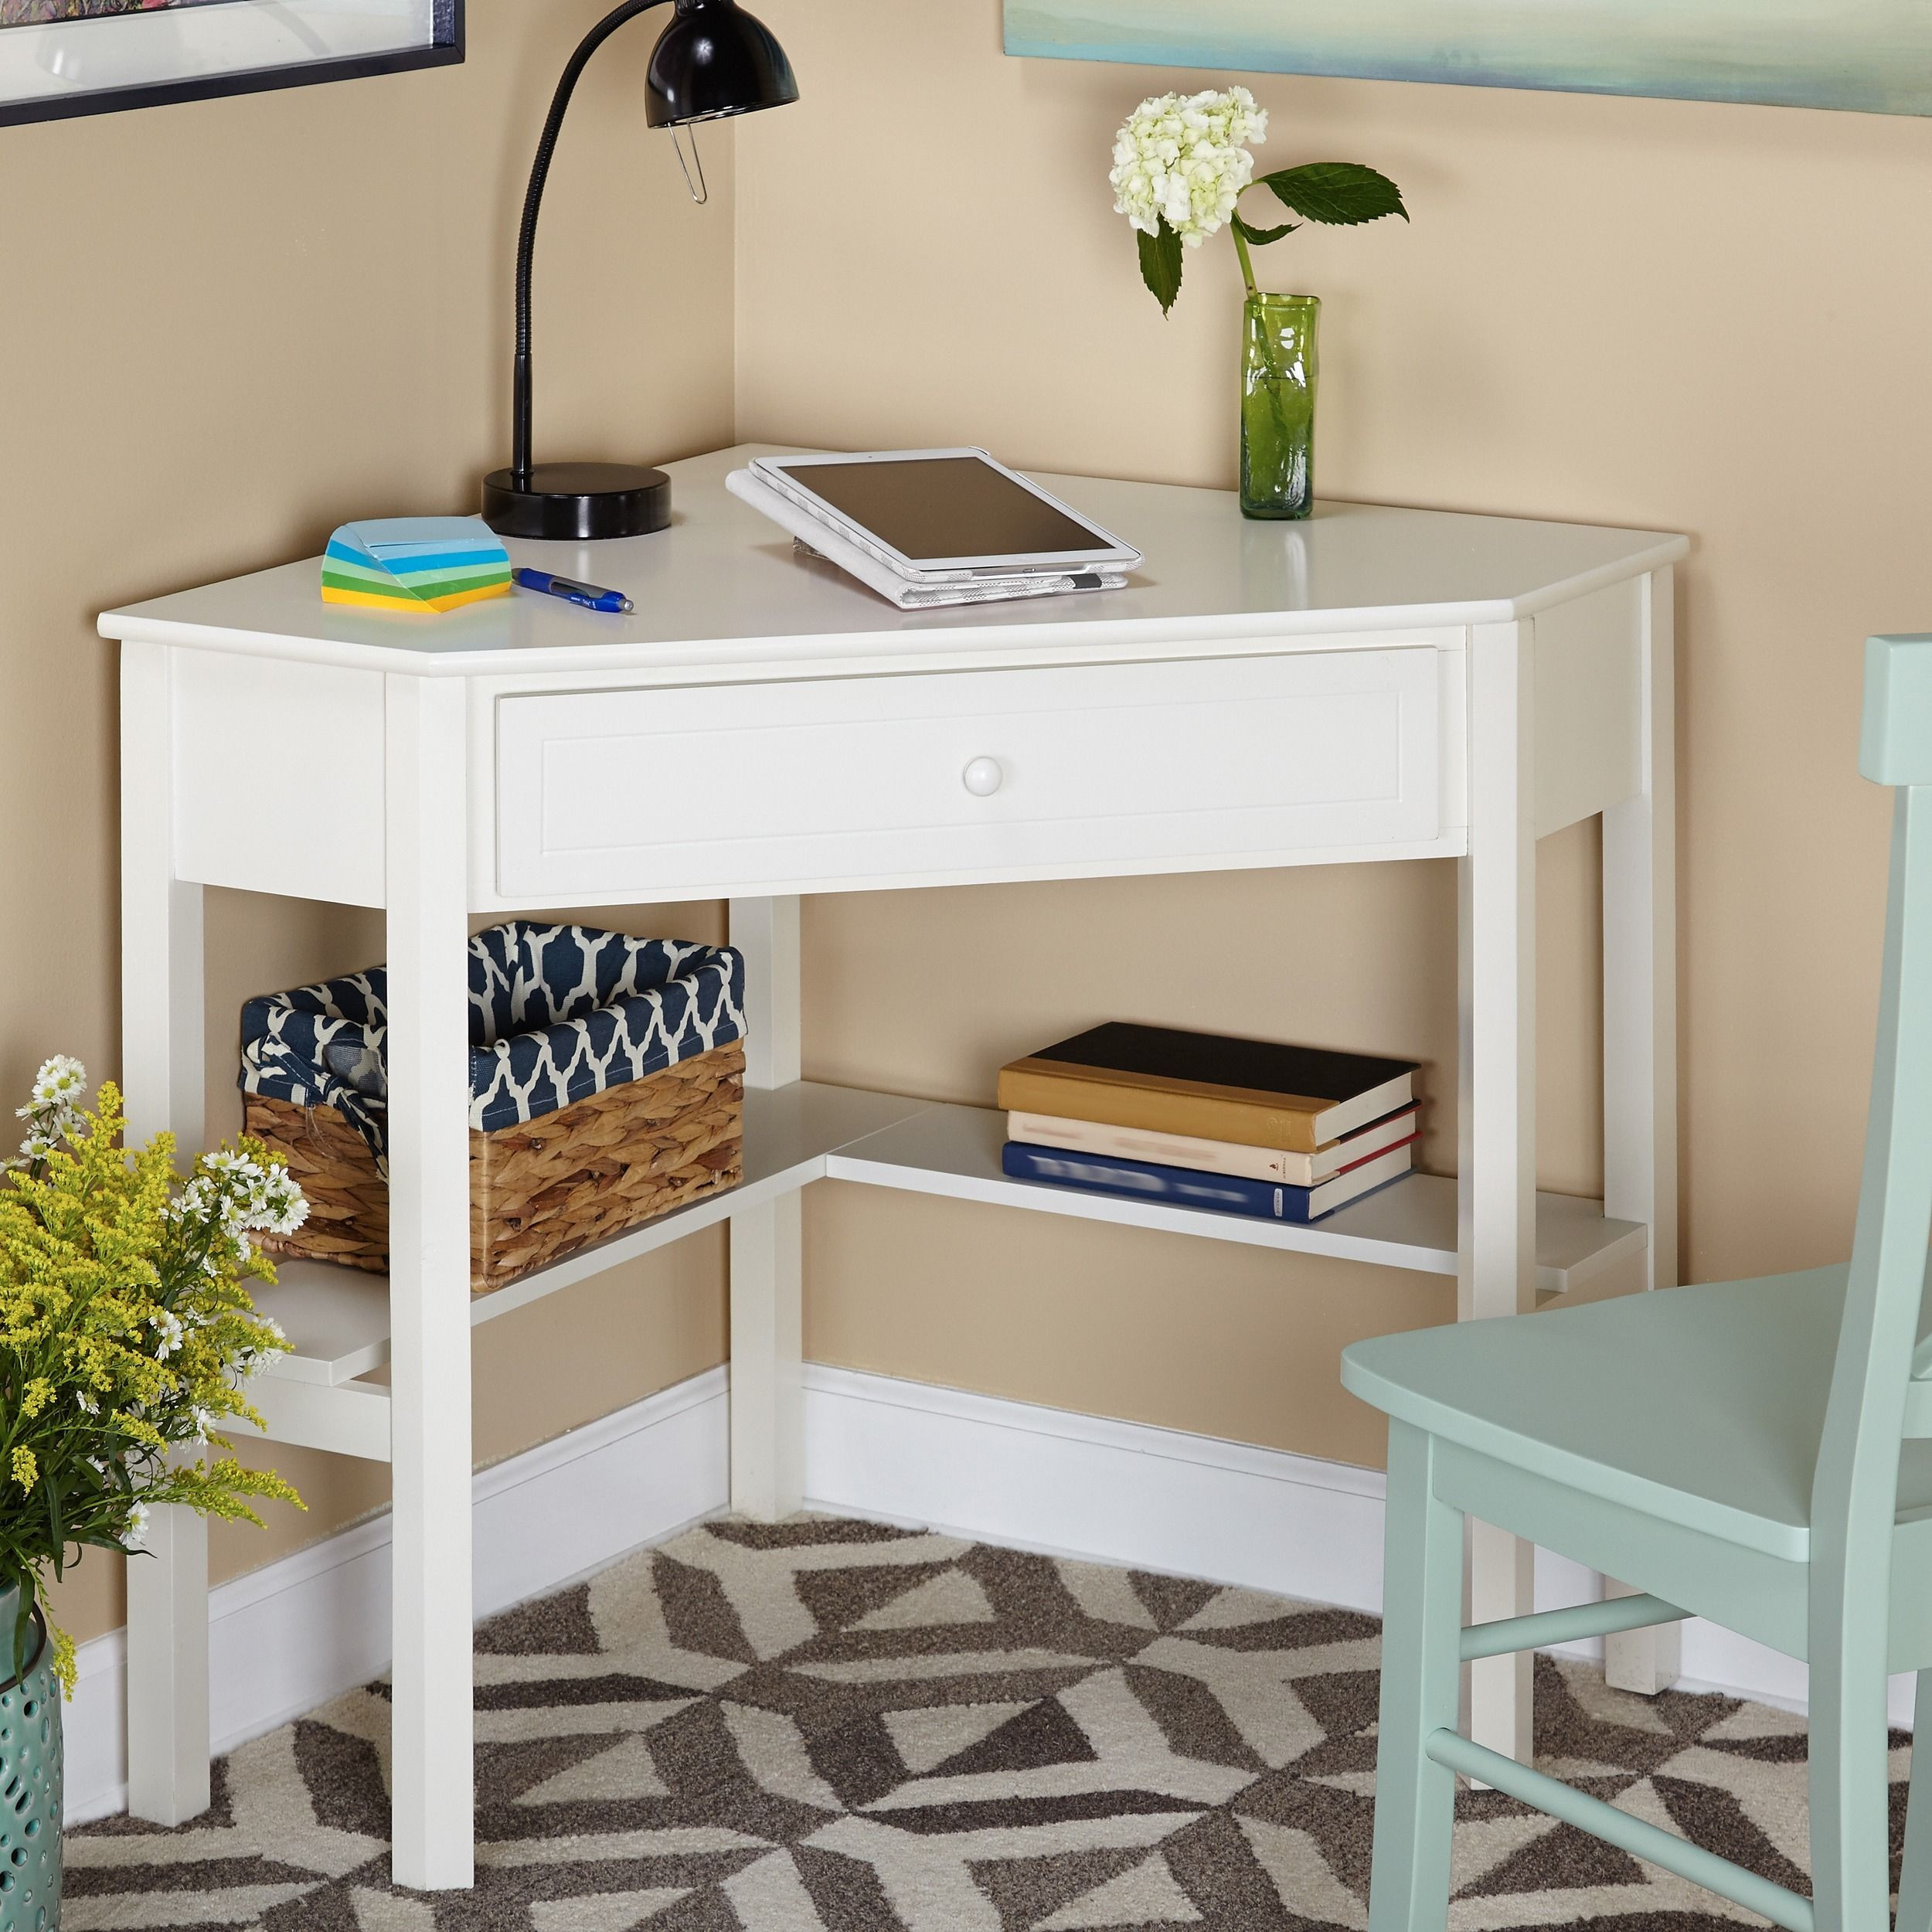 Small Writing Desk For Bedroom
 Porch & Den Third Ward Lincoln White Wood Corner puter